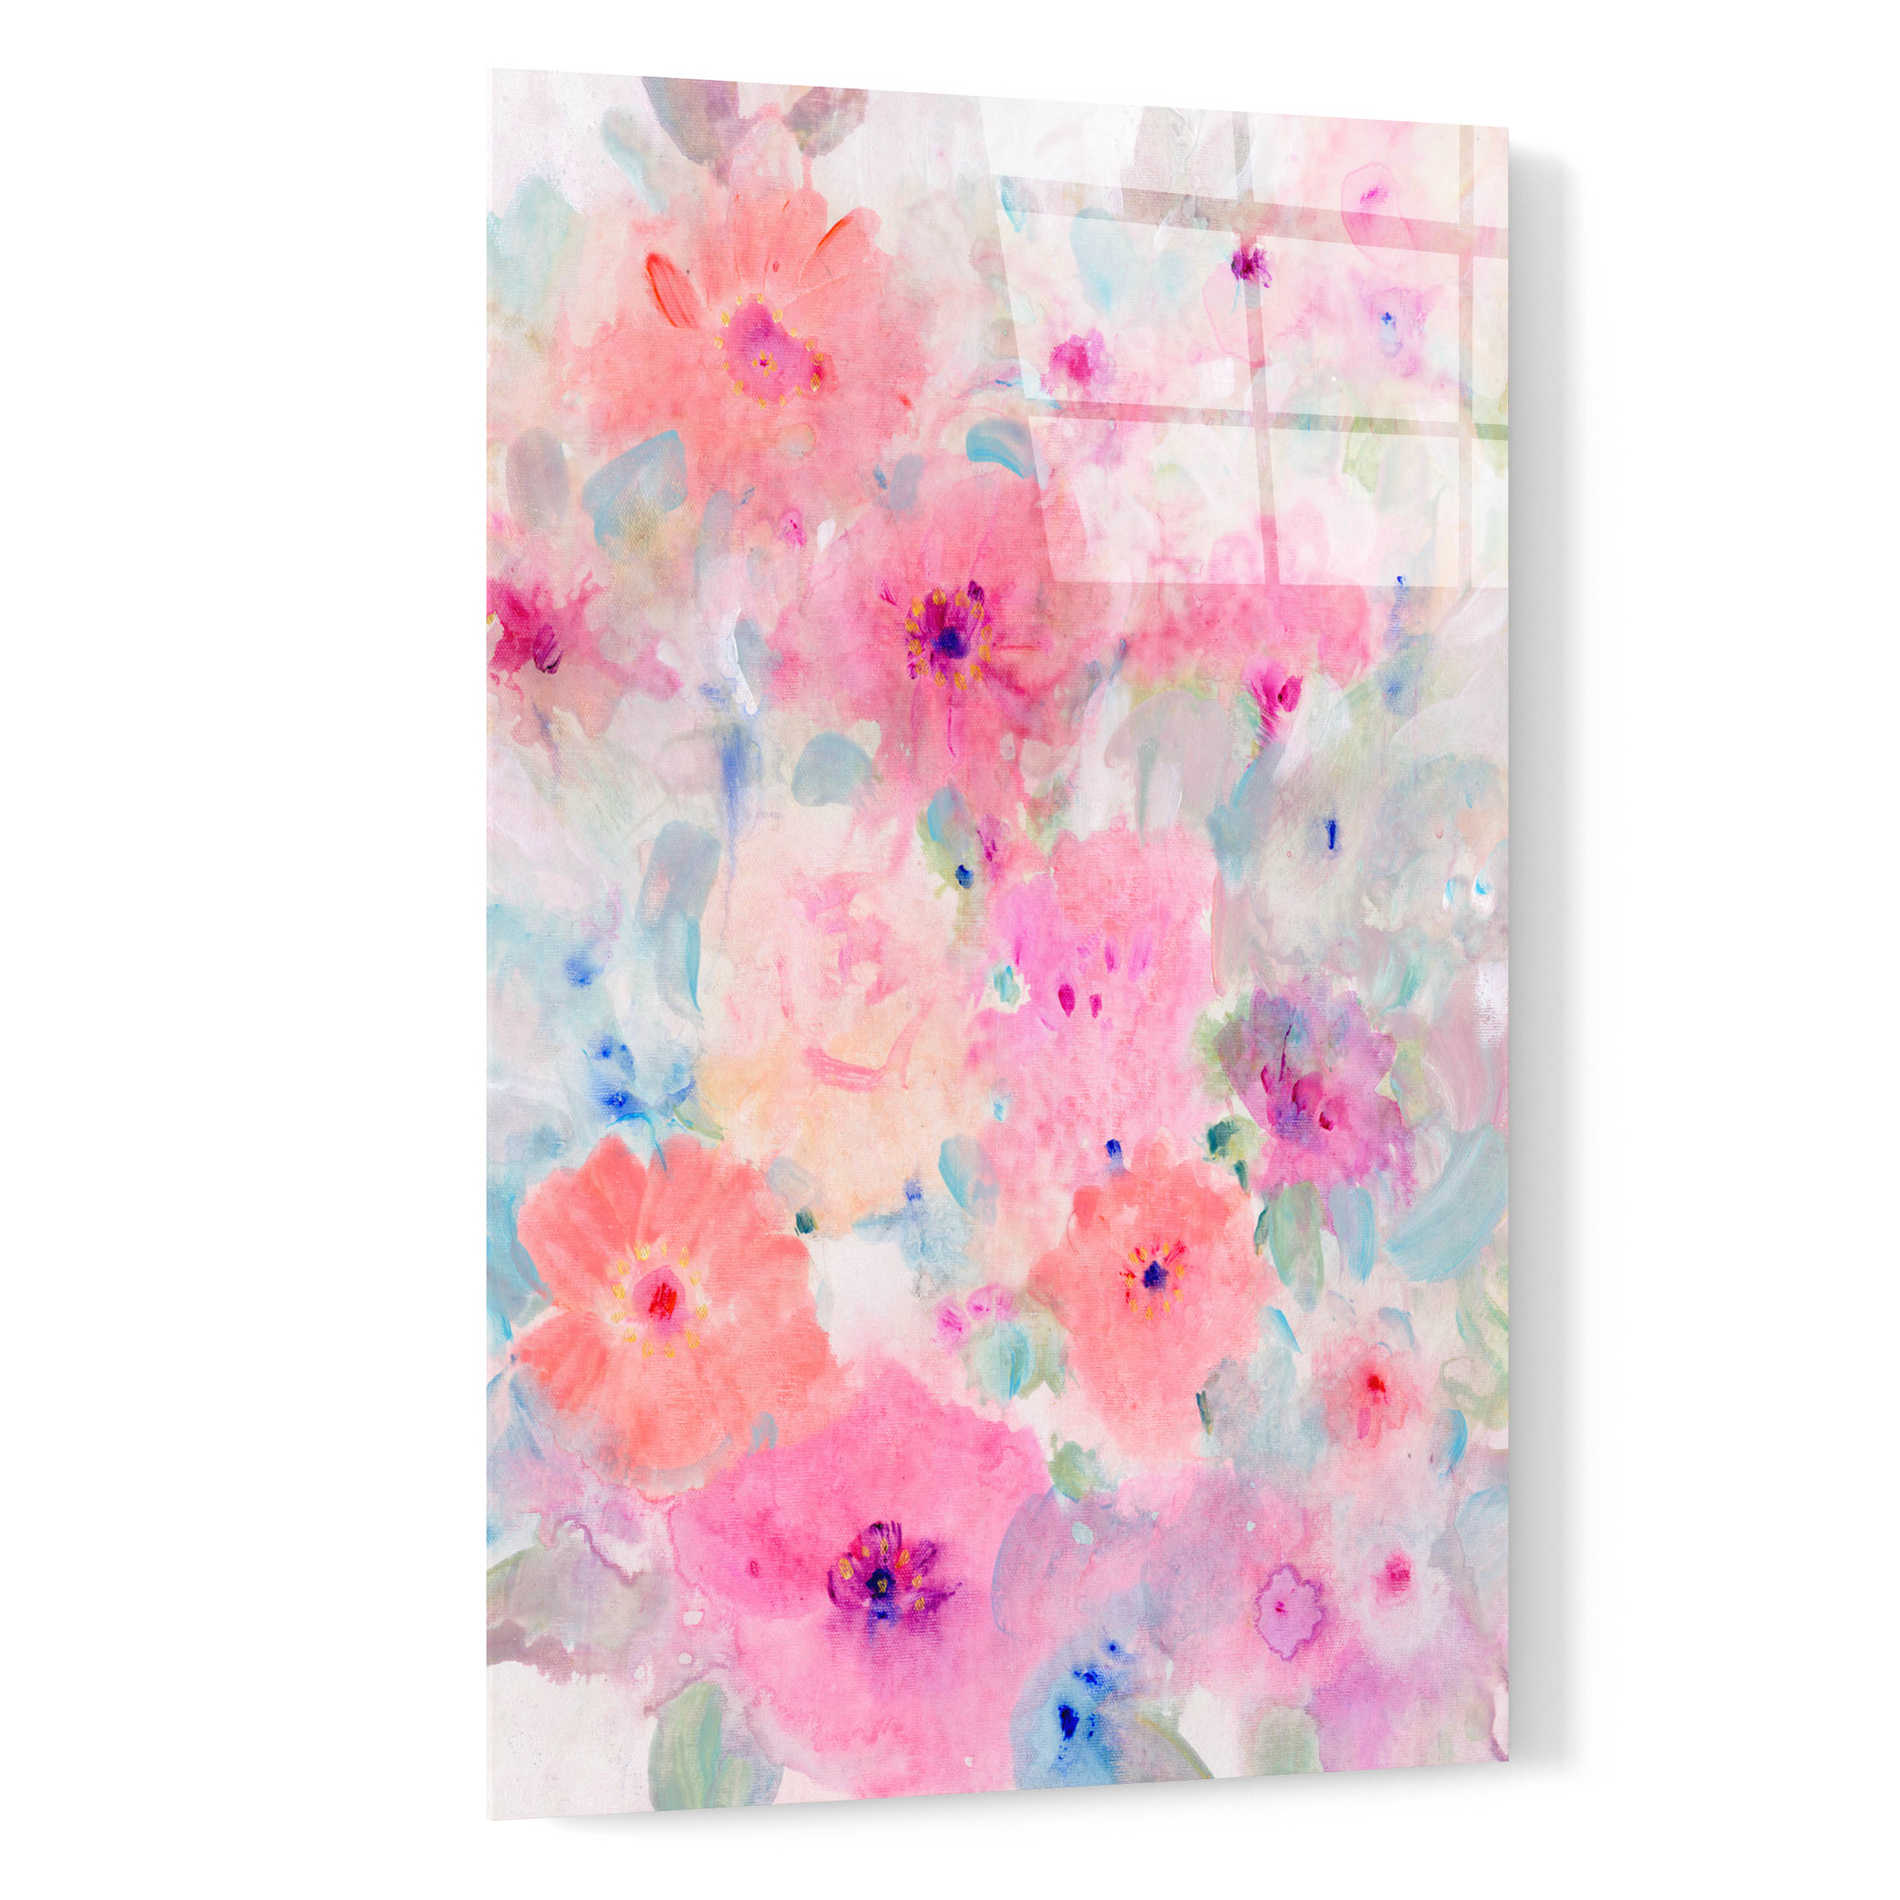 Epic Art 'Bright Floral Design  I' by Tim O'Toole, Acrylic Glass Wall Art,16x24